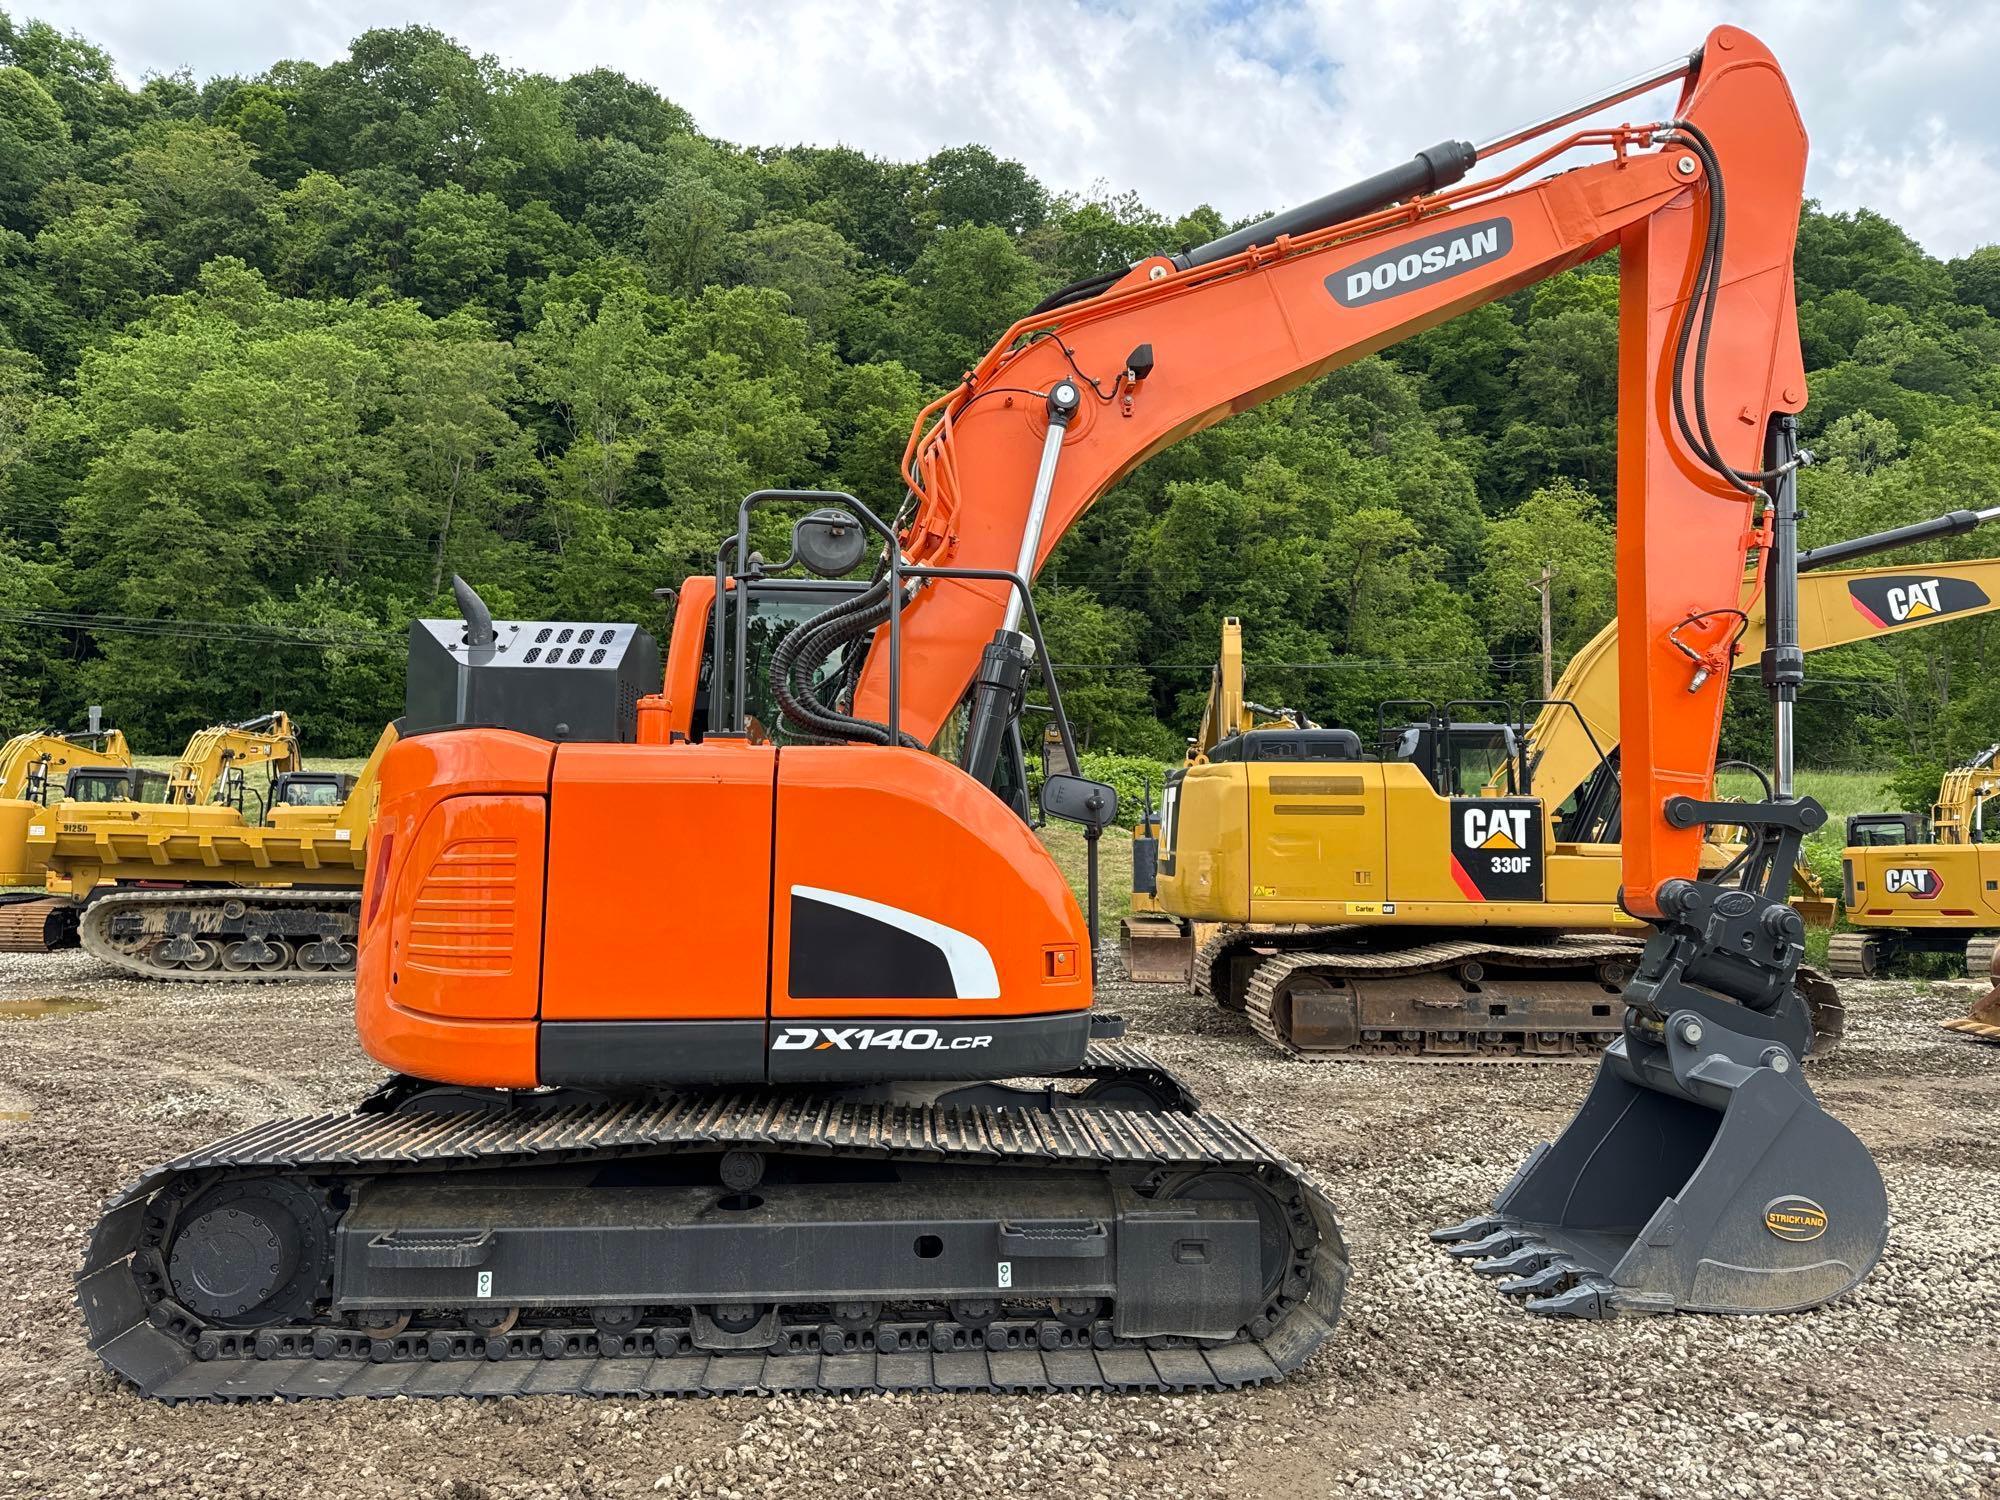 2019 DOOSAN DX140LCR-5 HYDRAULIC EXCAVATOR SN:20341 powered by diesel engine, equipped with Cab,